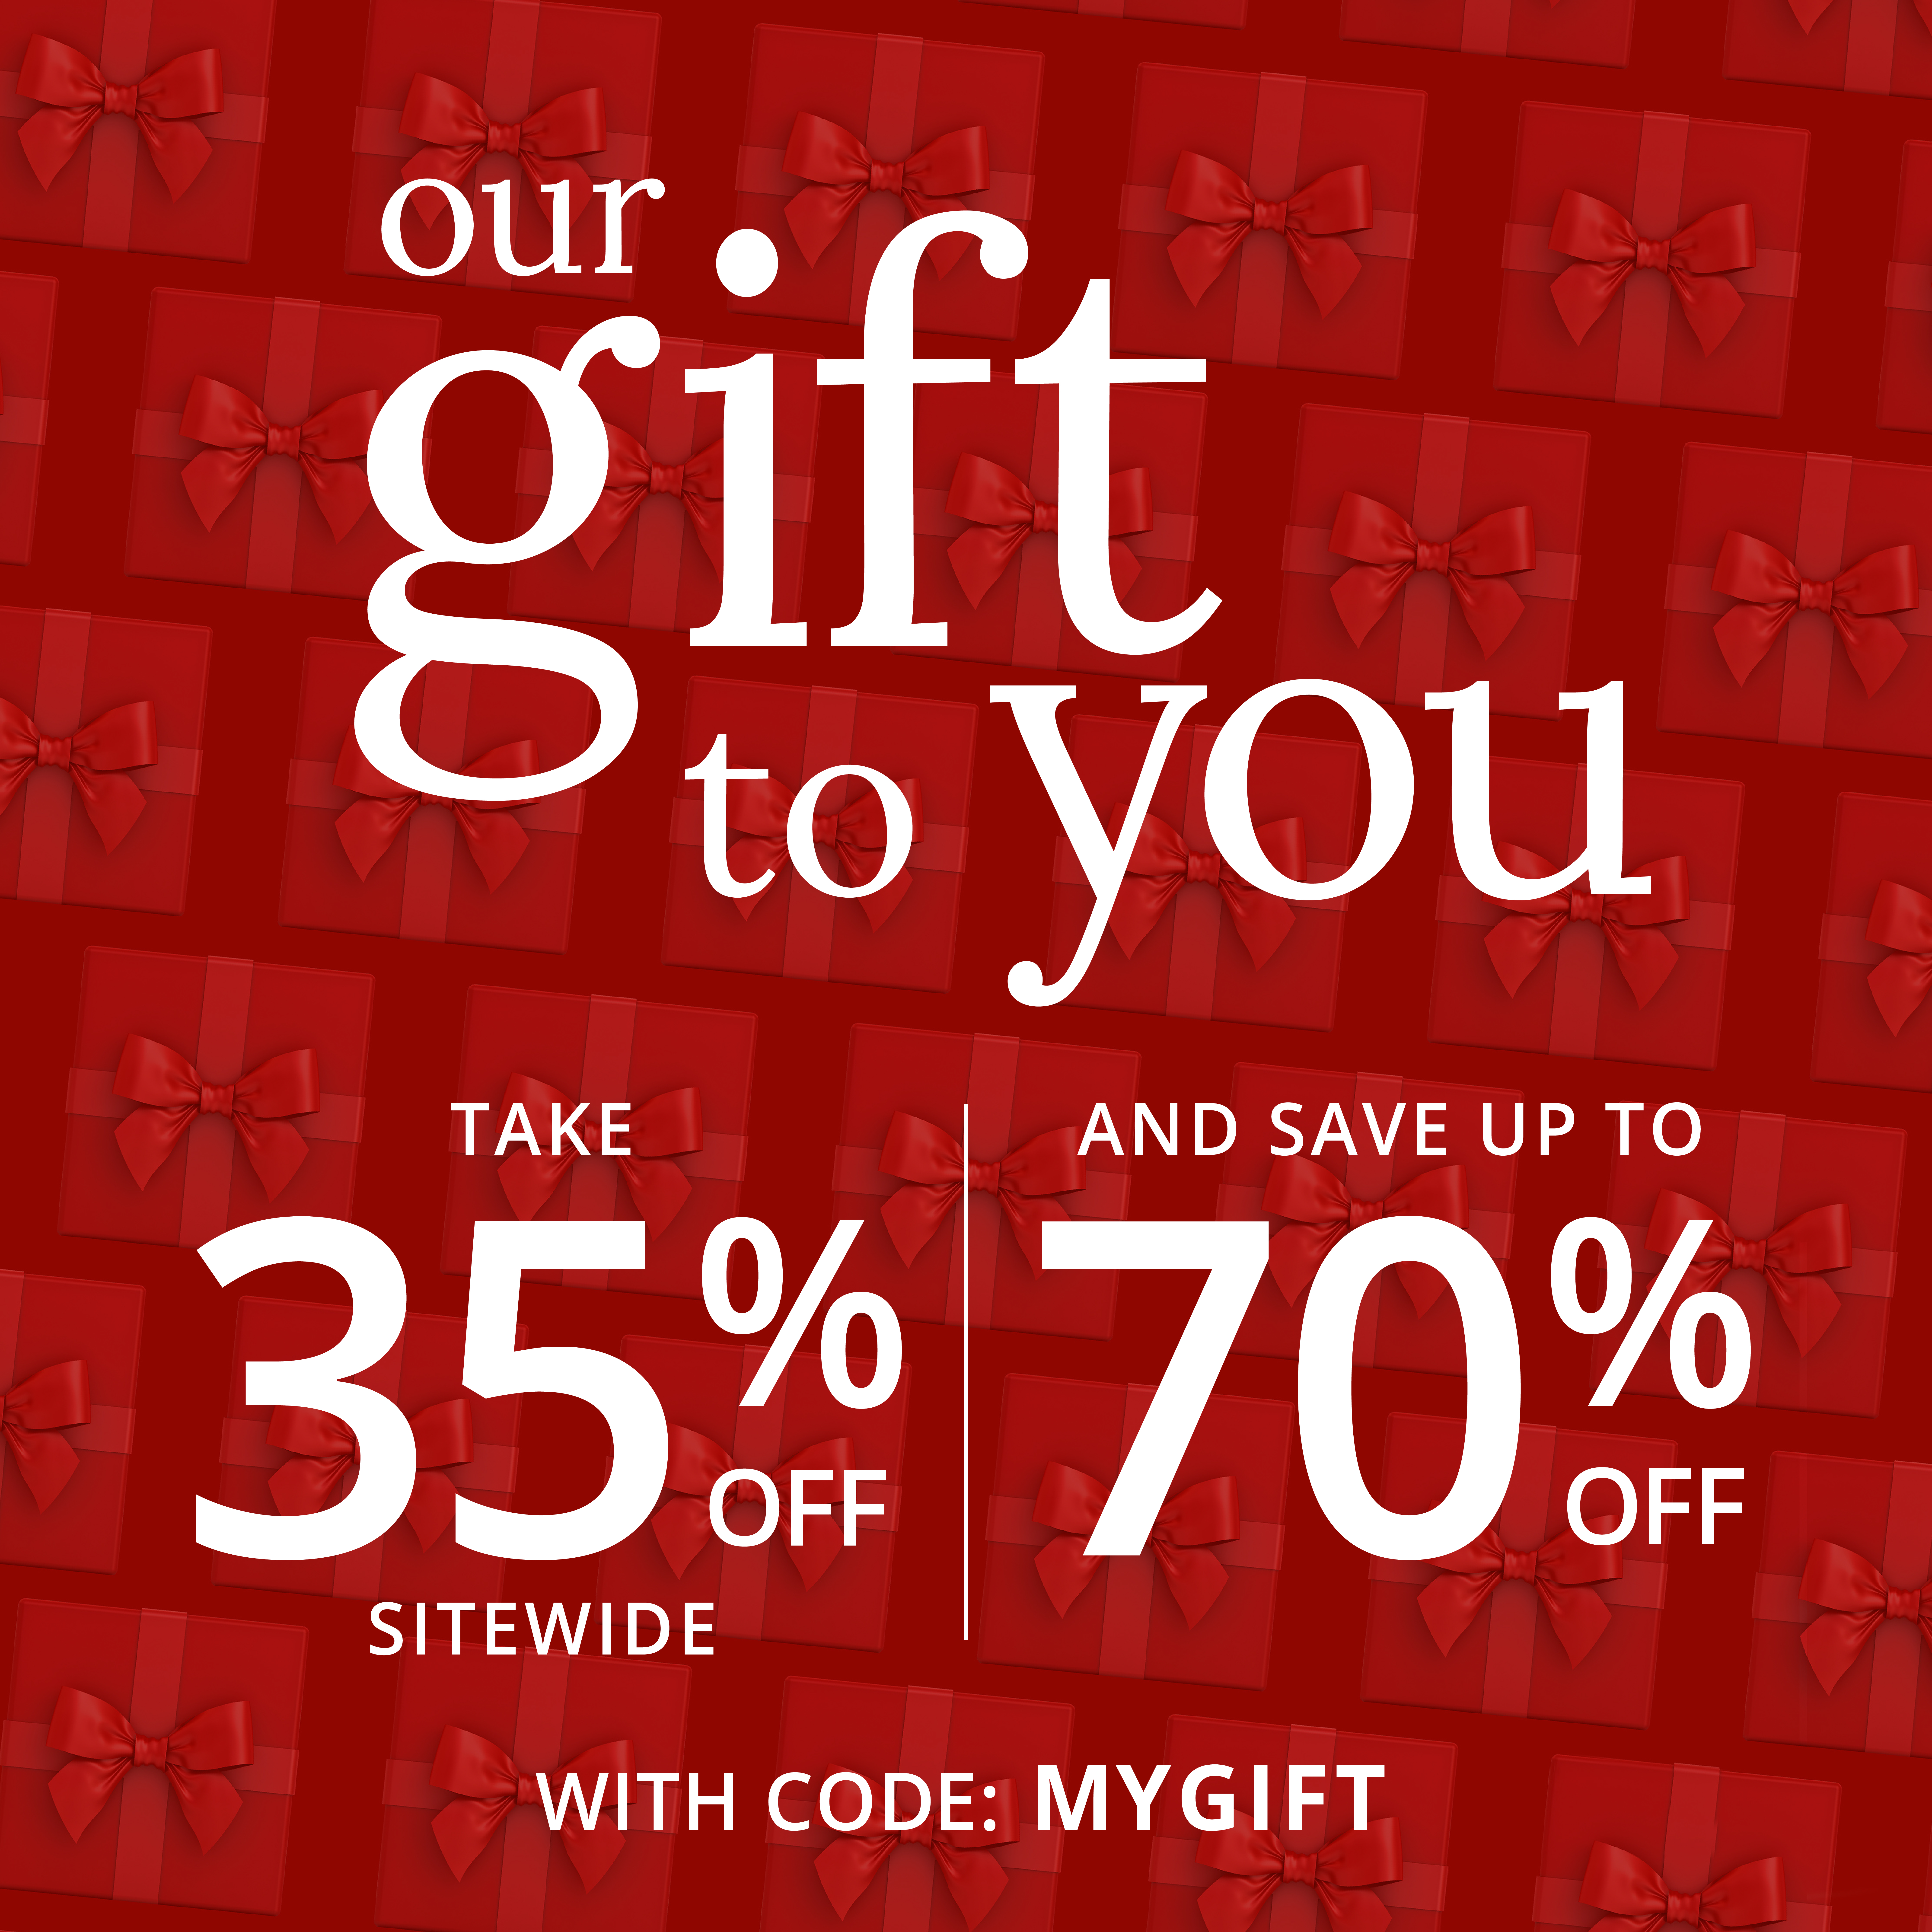  TAKE AND SAVE UP TO 7 v OFF WITH CODE: MYGIFT % 3 OFF SITEWIDE 